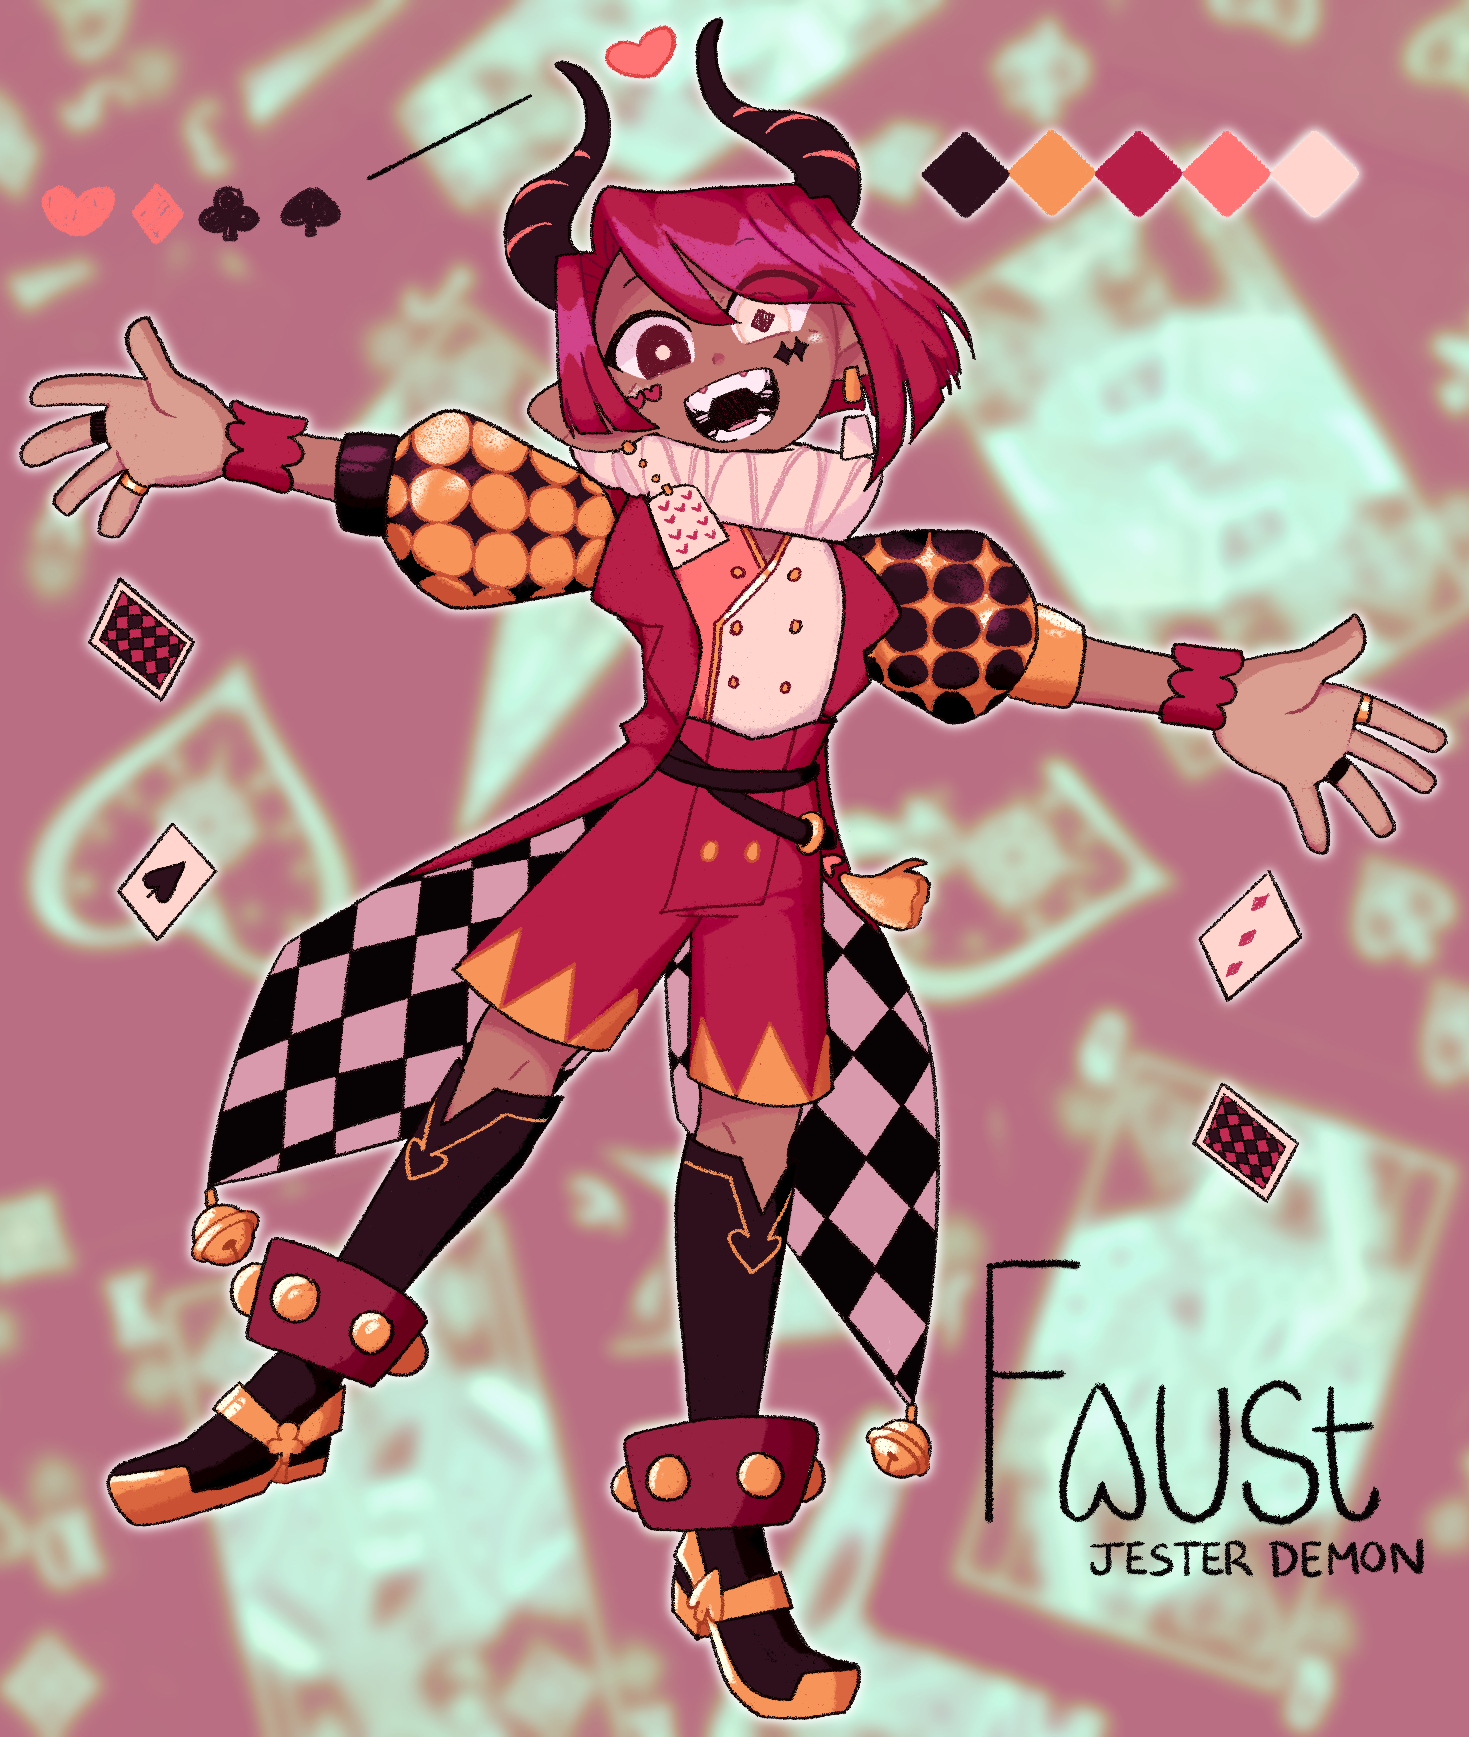 Initial reference pass of original character Faust, Jester Demon.